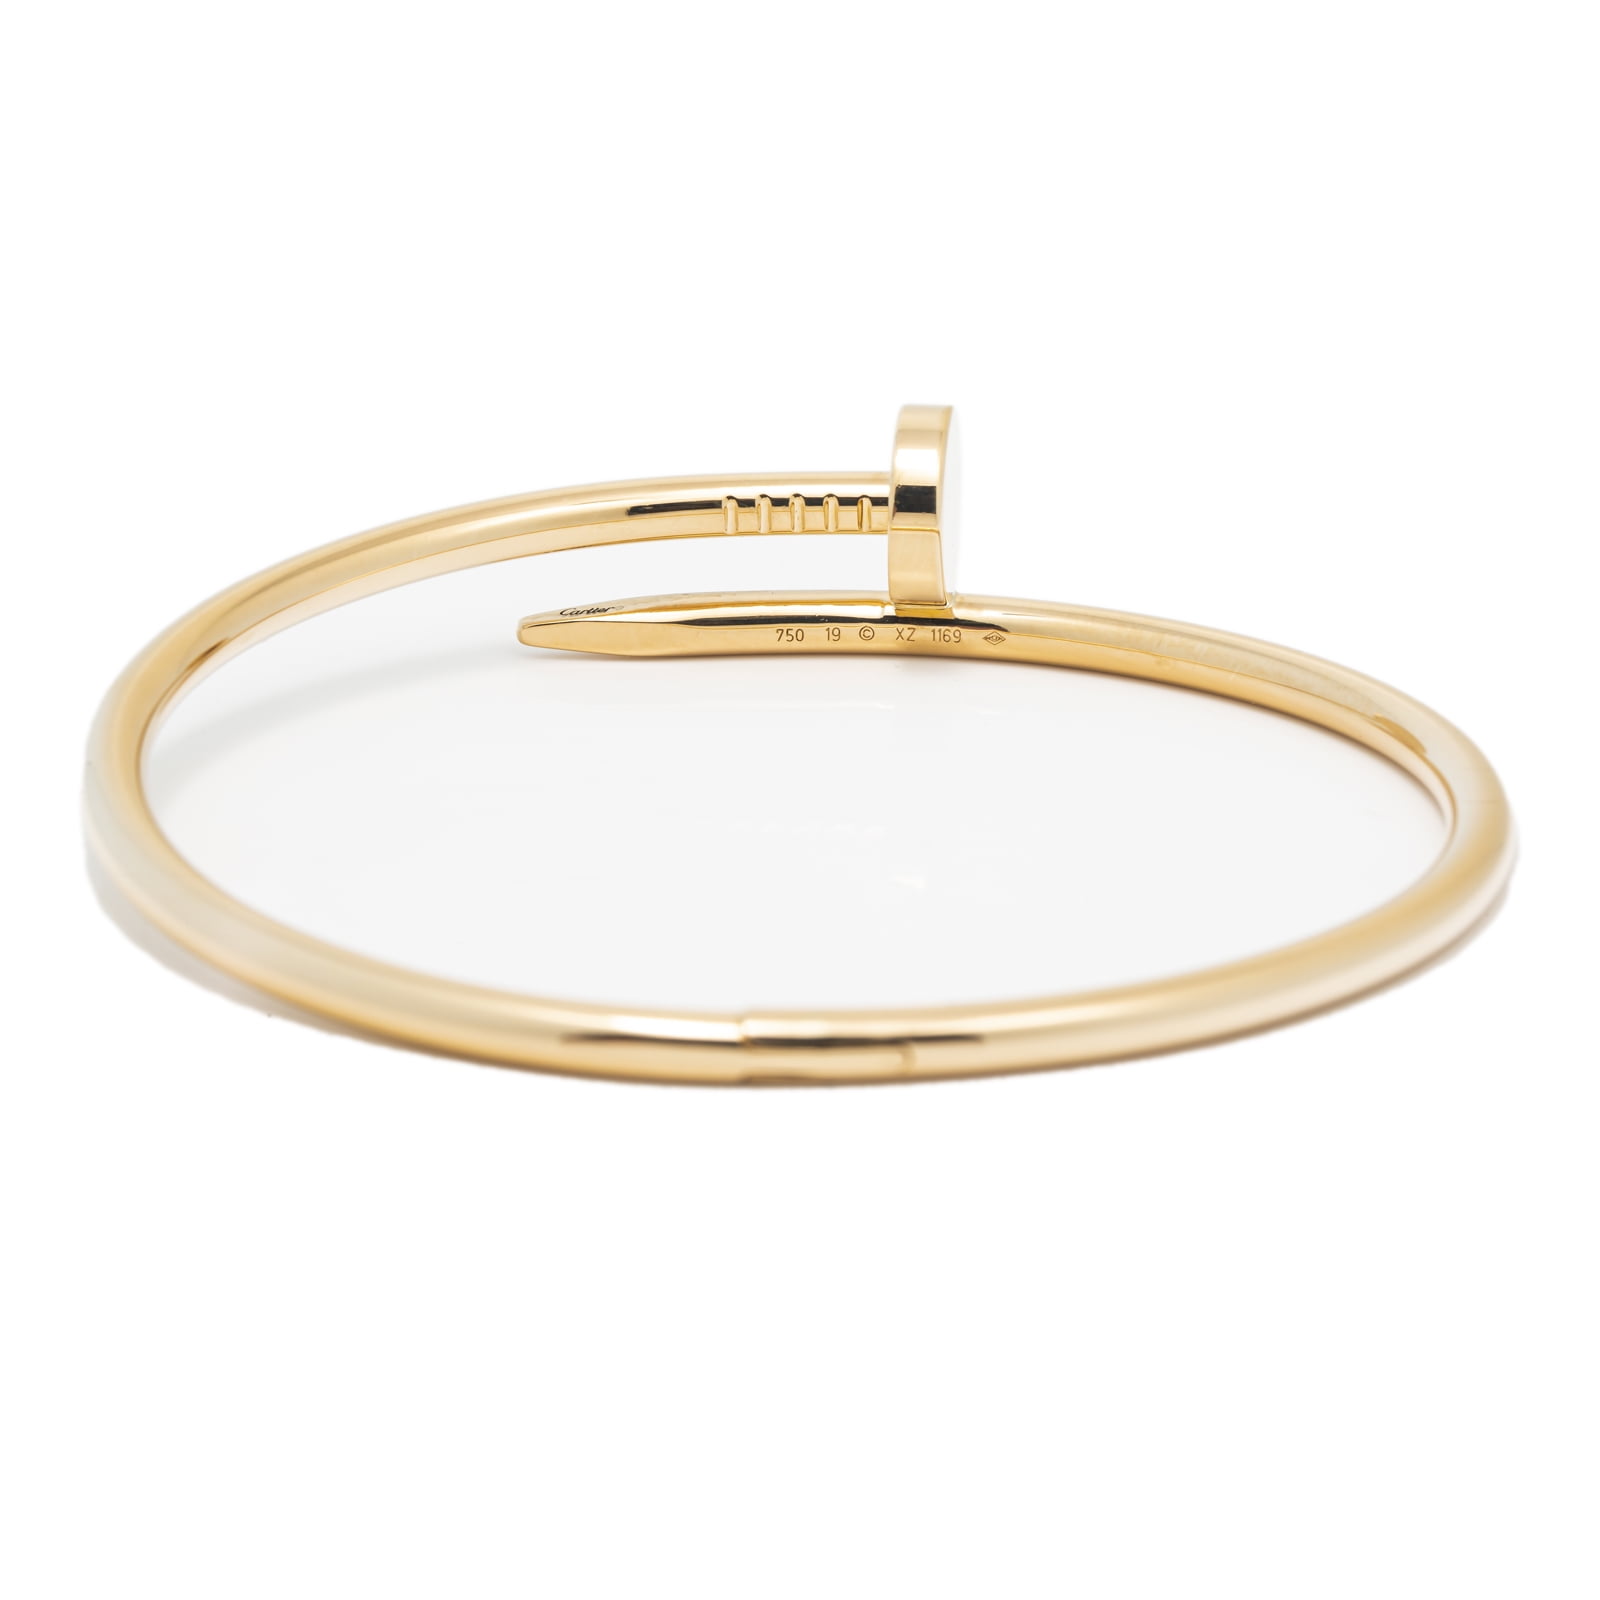 Gold Cuff Tennis Nail Bangle Bracelet For Women And Men, Designer Fashion  For Couples, Wedding, Party, Thanksgiving, Valentines Day Gift Set From  Premiumjewelrystore, $23.69 | DHgate.Com